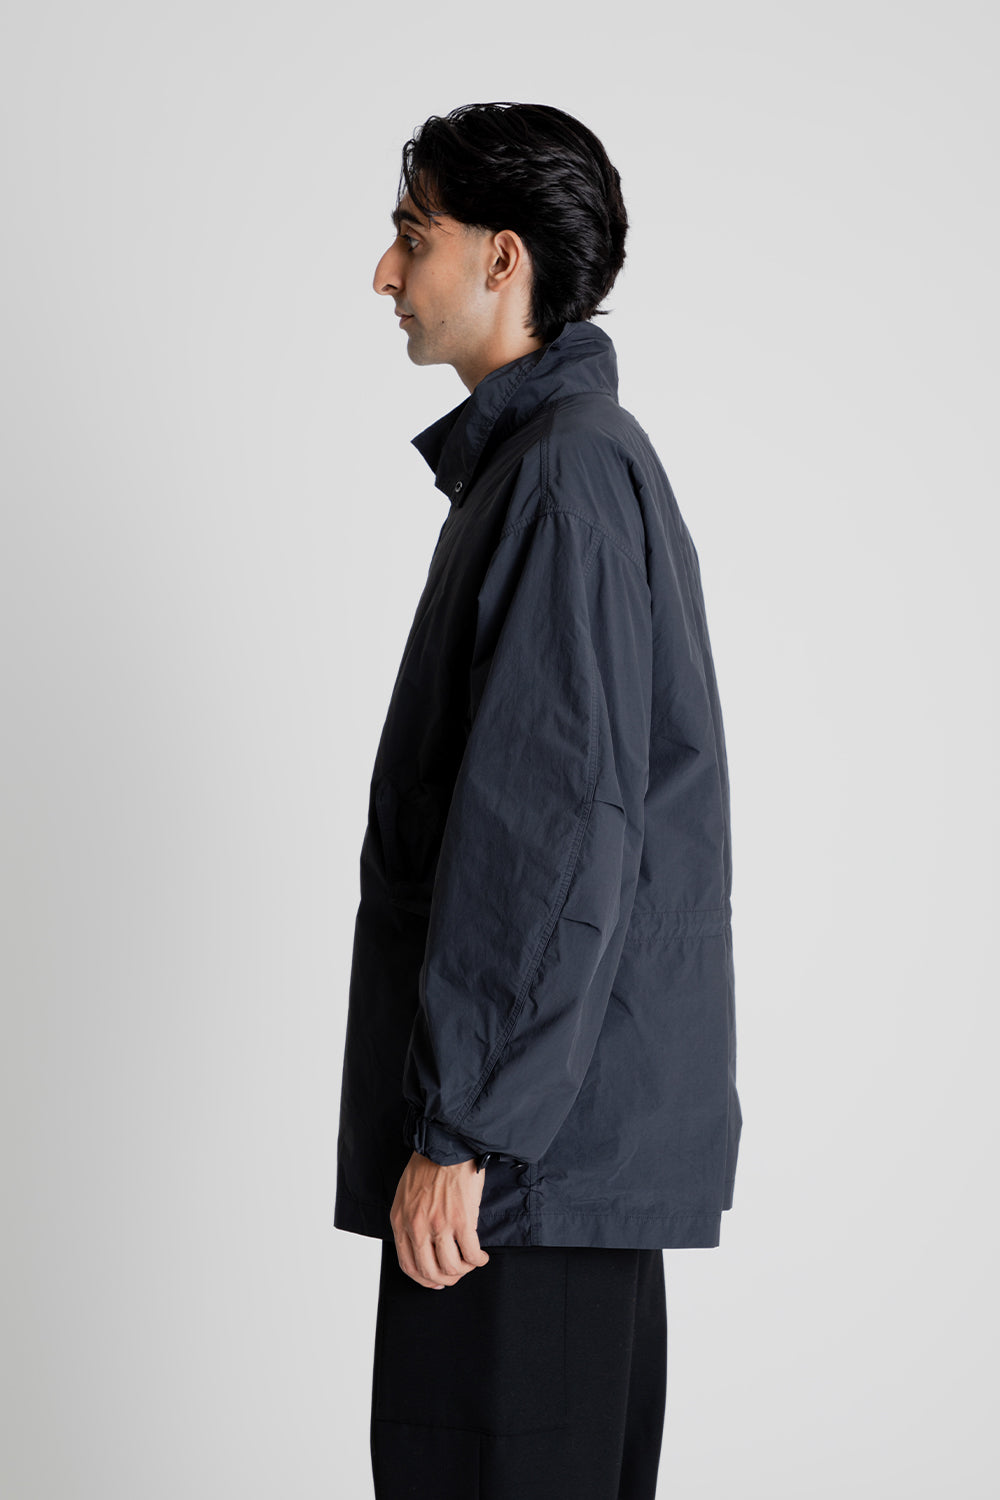 Aton Air Ventile Short Mods Coat in Charcoal Grey | Wallace 